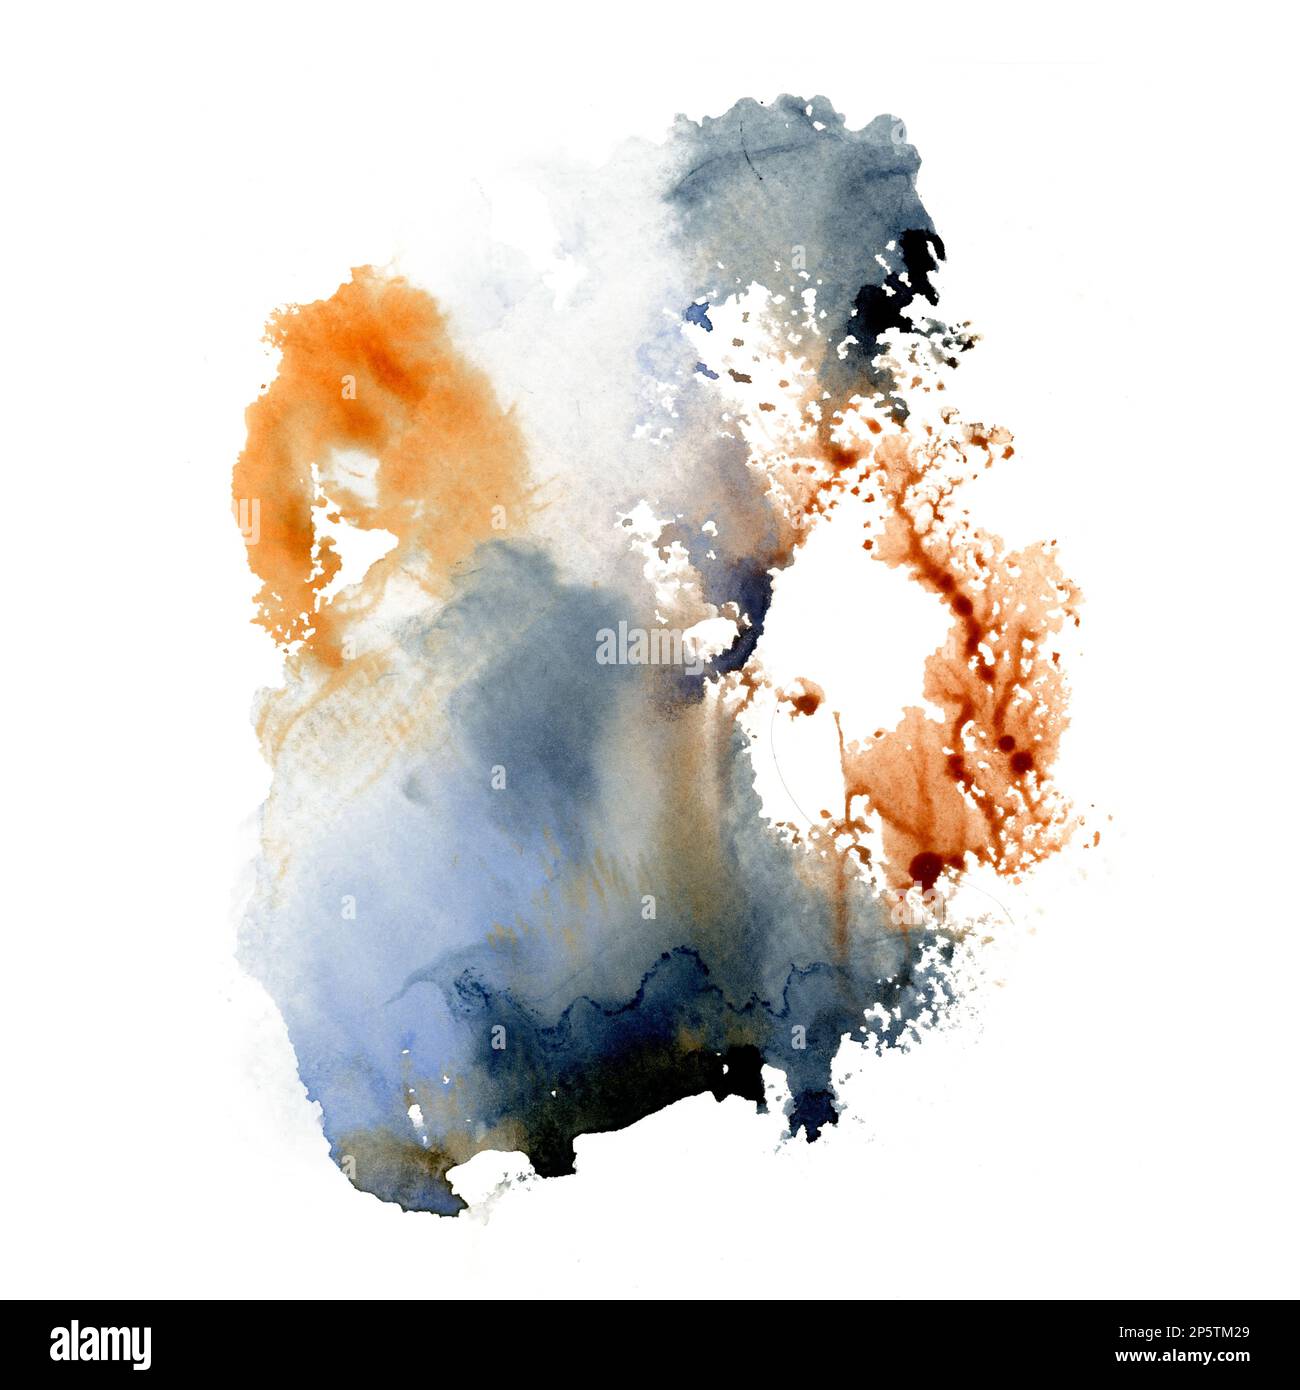 Blue orange watercolor splashes. Colorful abstract background illustration with paint stains and blots isolated on white Stock Photo